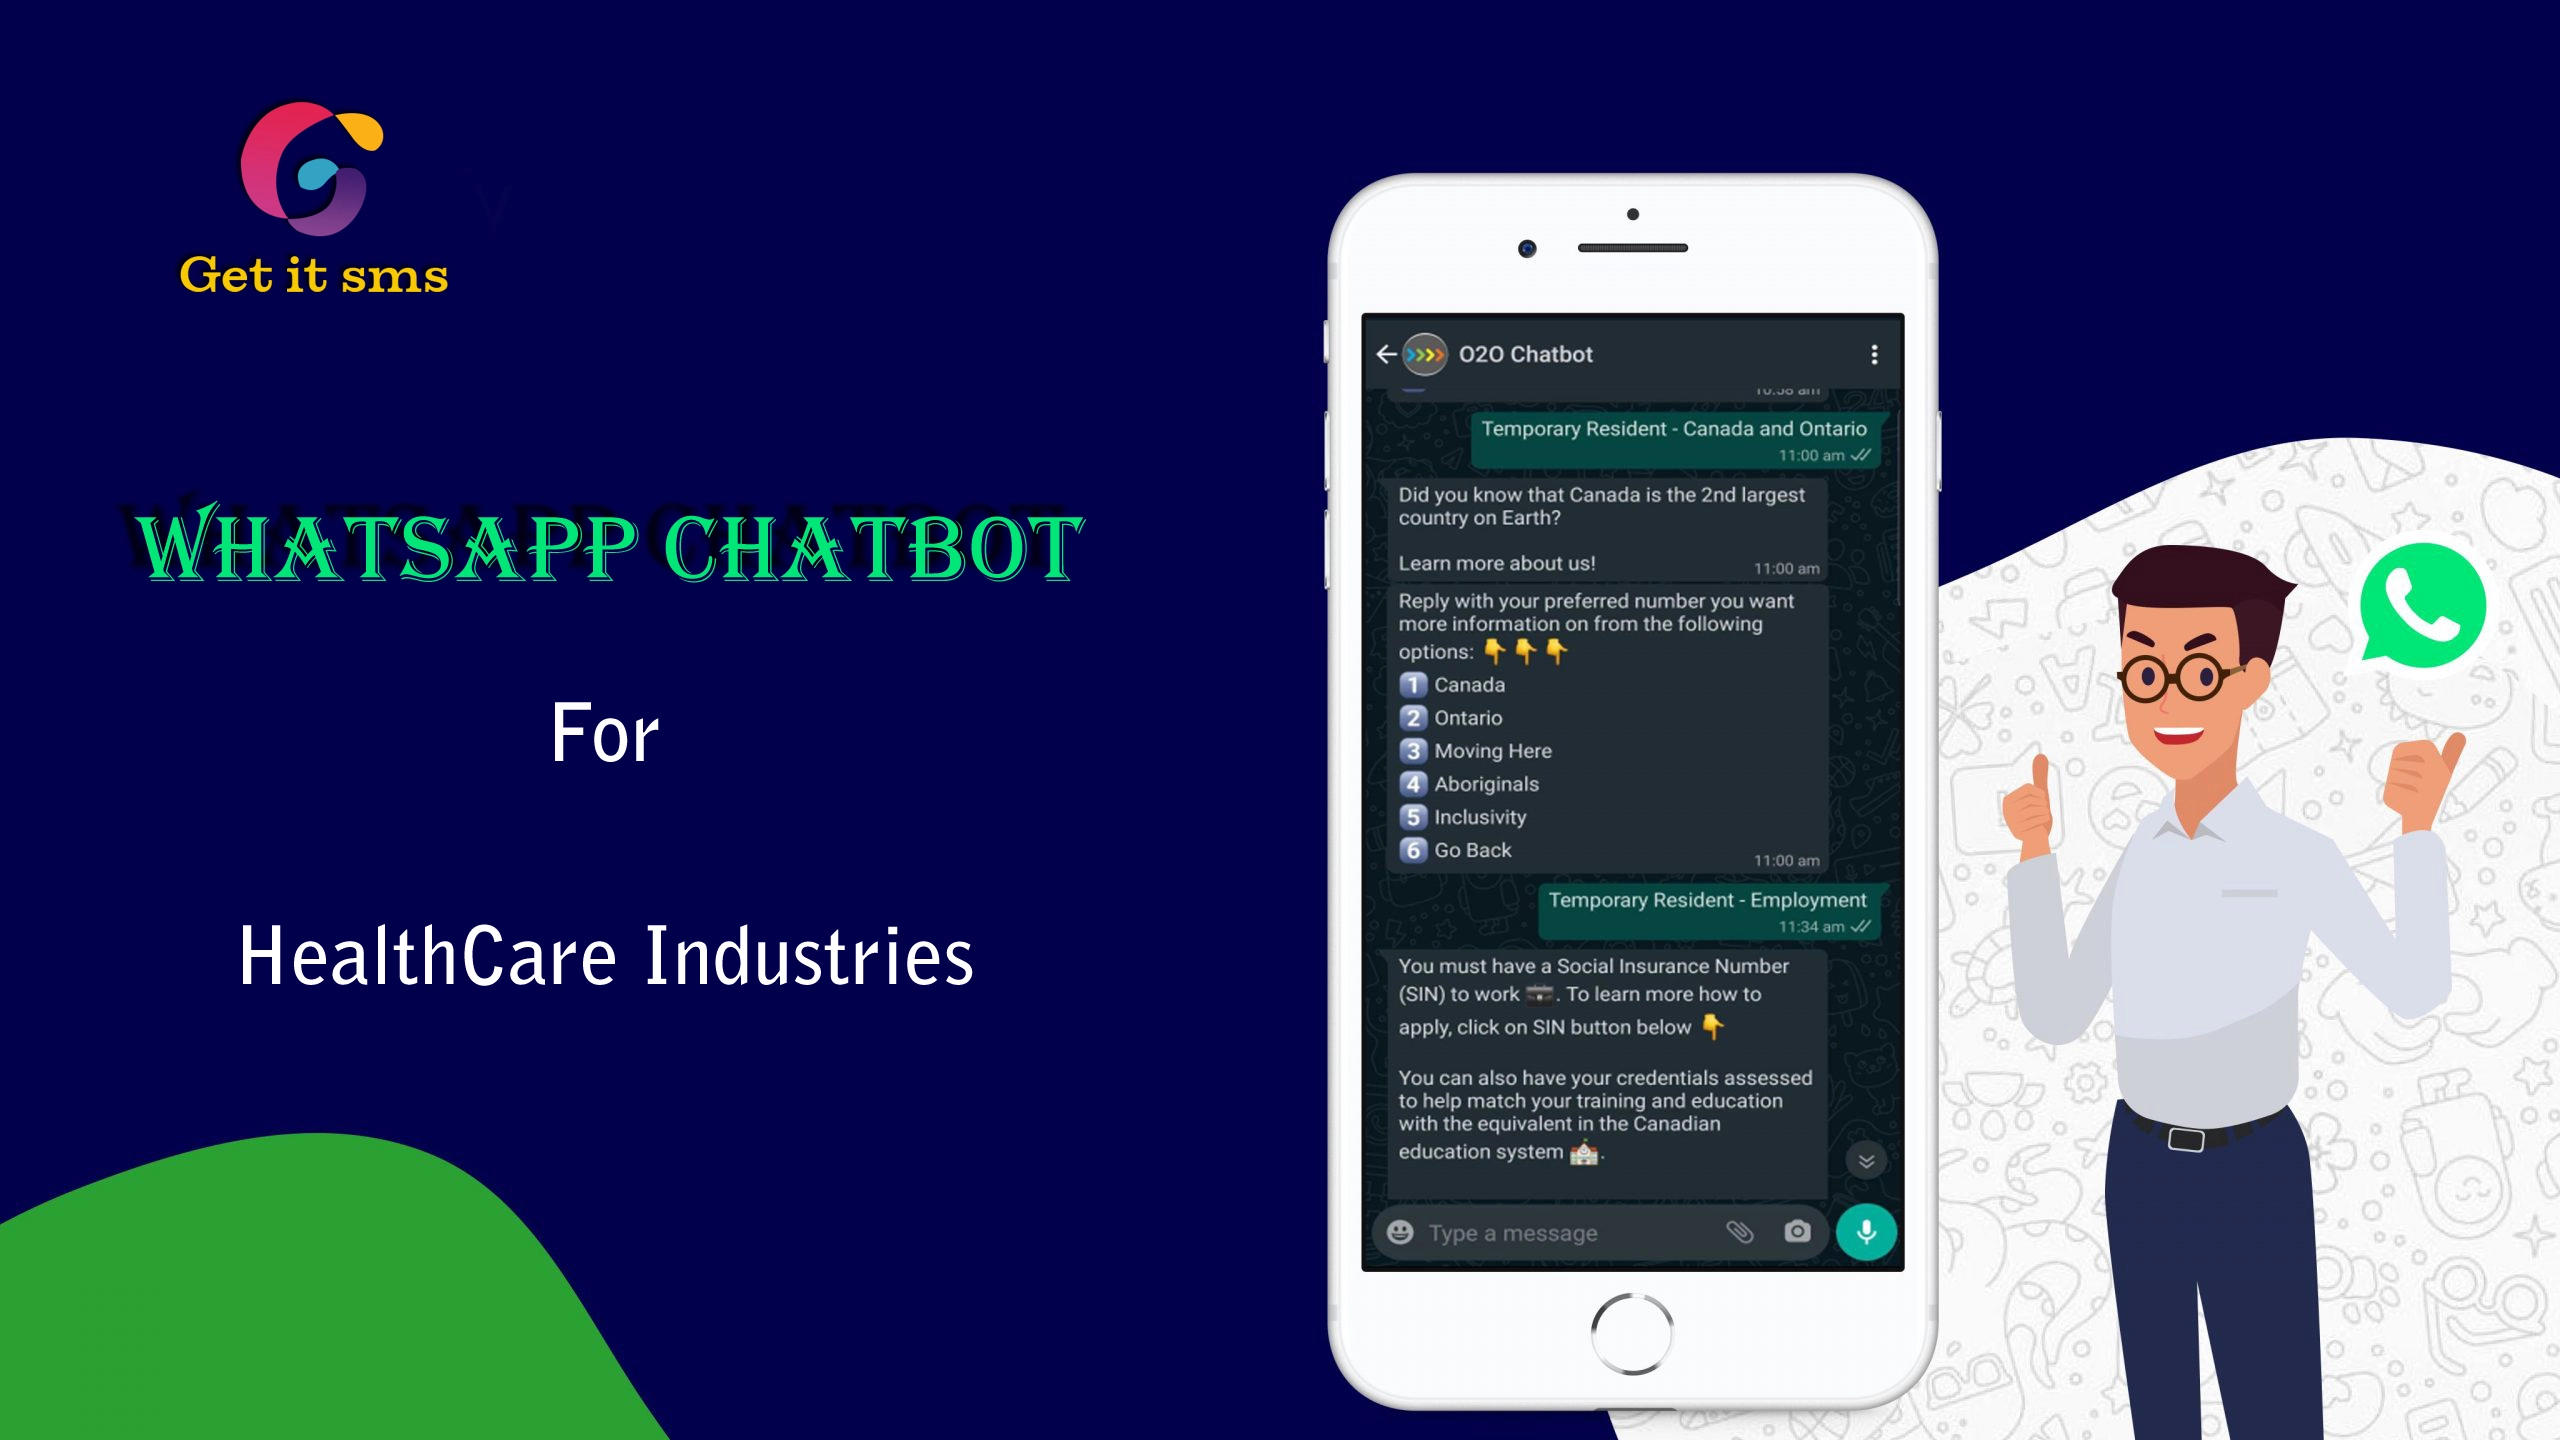 What Is The Role of WhatsApp Chatbot in Healthcare Industries?